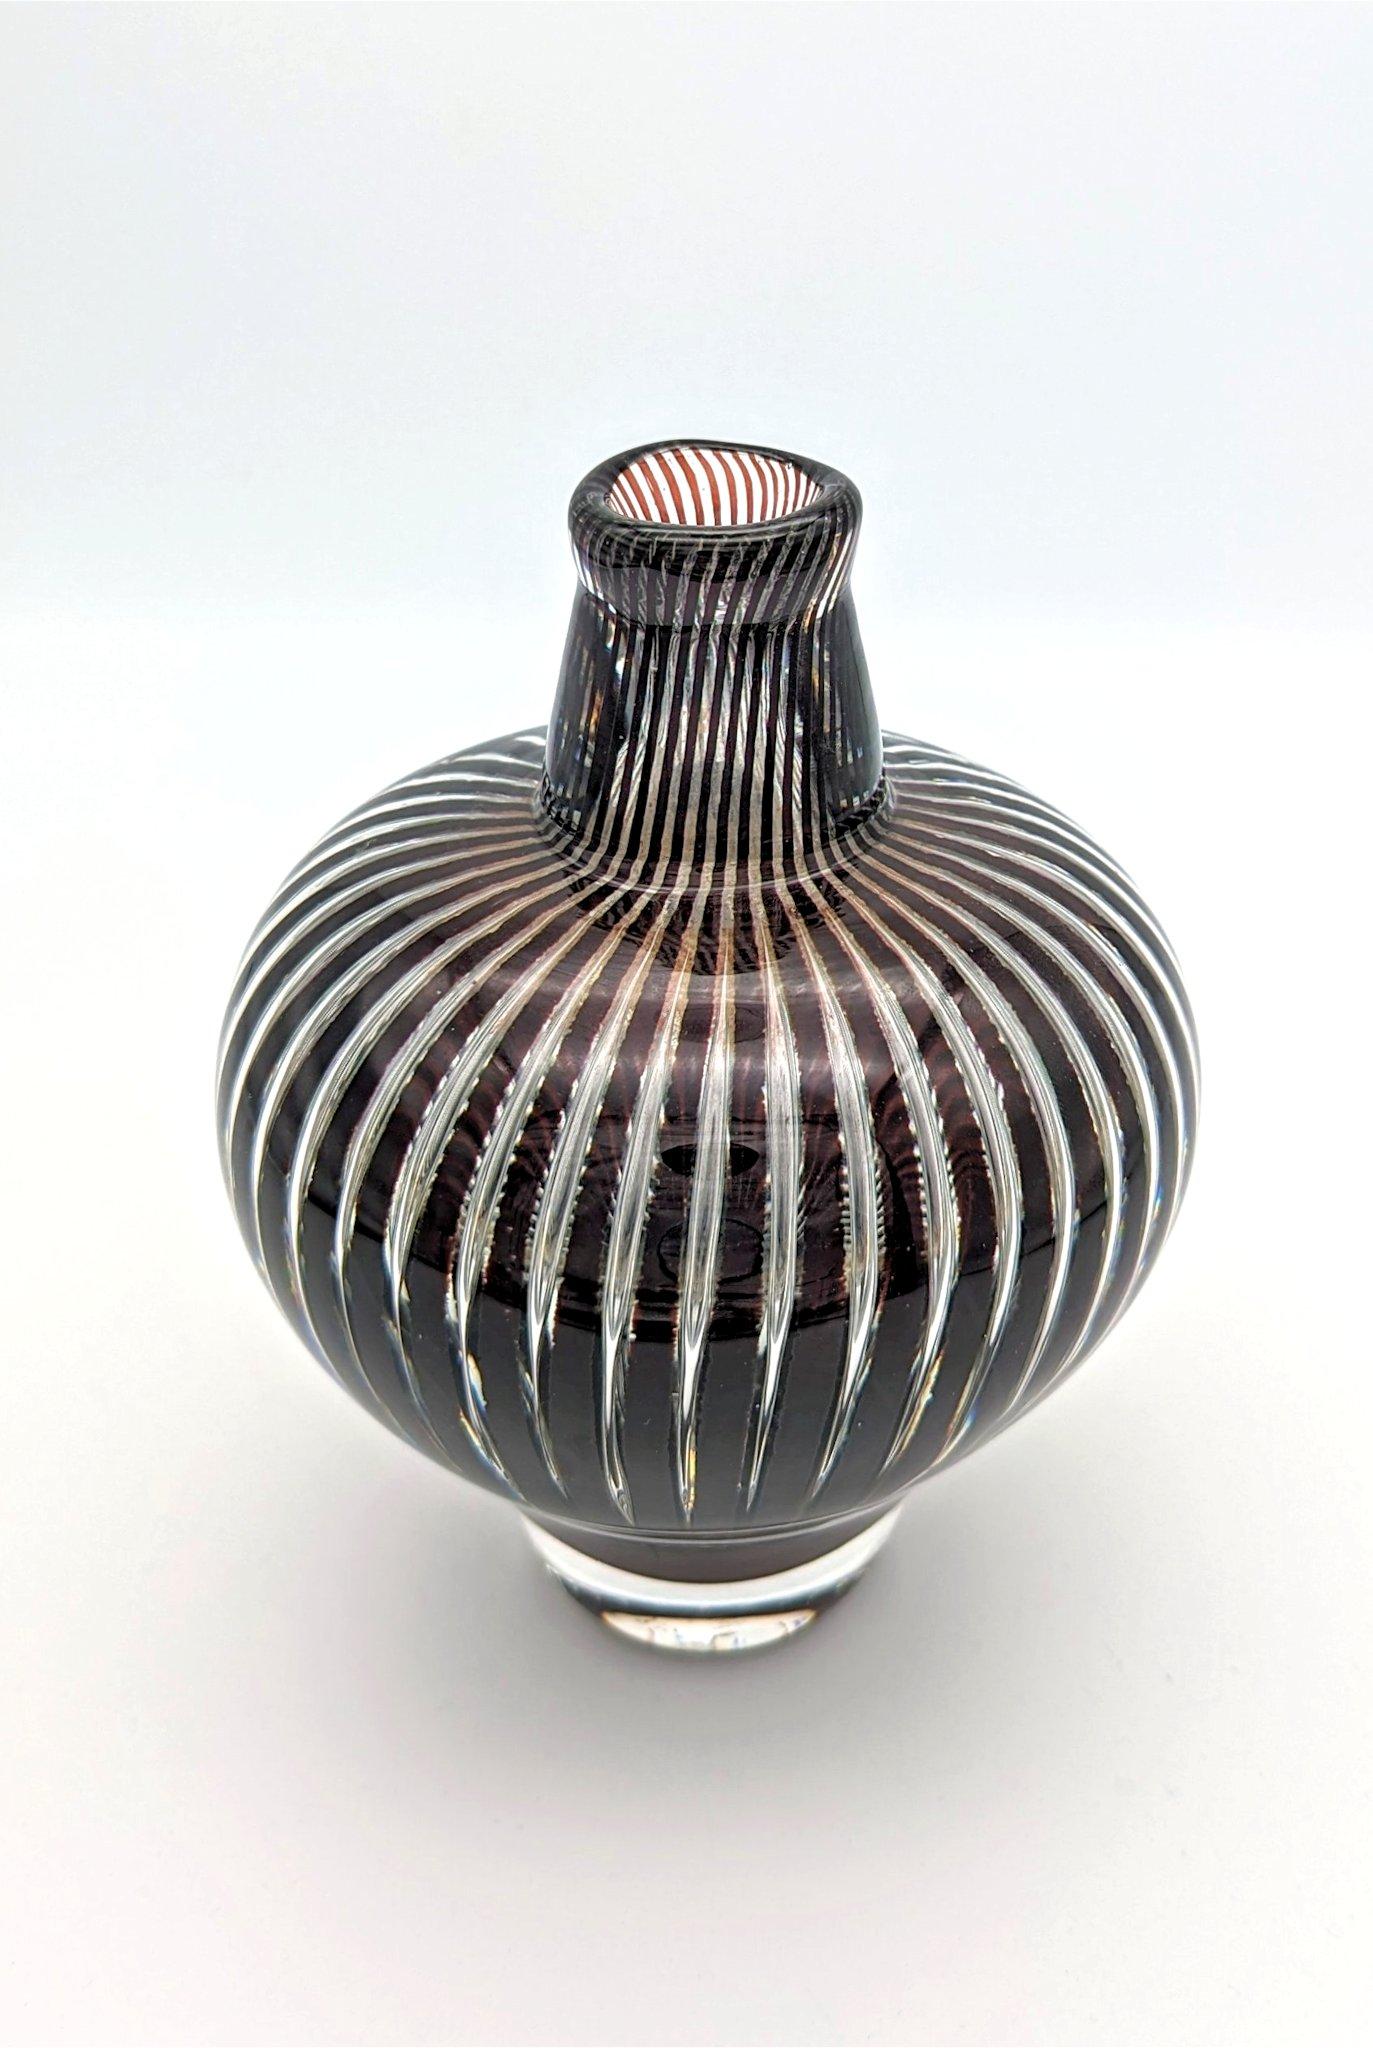 A good and early Ariel glass vase, designed by Edvin Öhrström, made in 1952 at the Orrefors Glaswork in Sweden. Öhrström who studied sculpture in Stockholm and in Paris was one of the inventors of the Ariel technique at Orrefors in Sweden. A